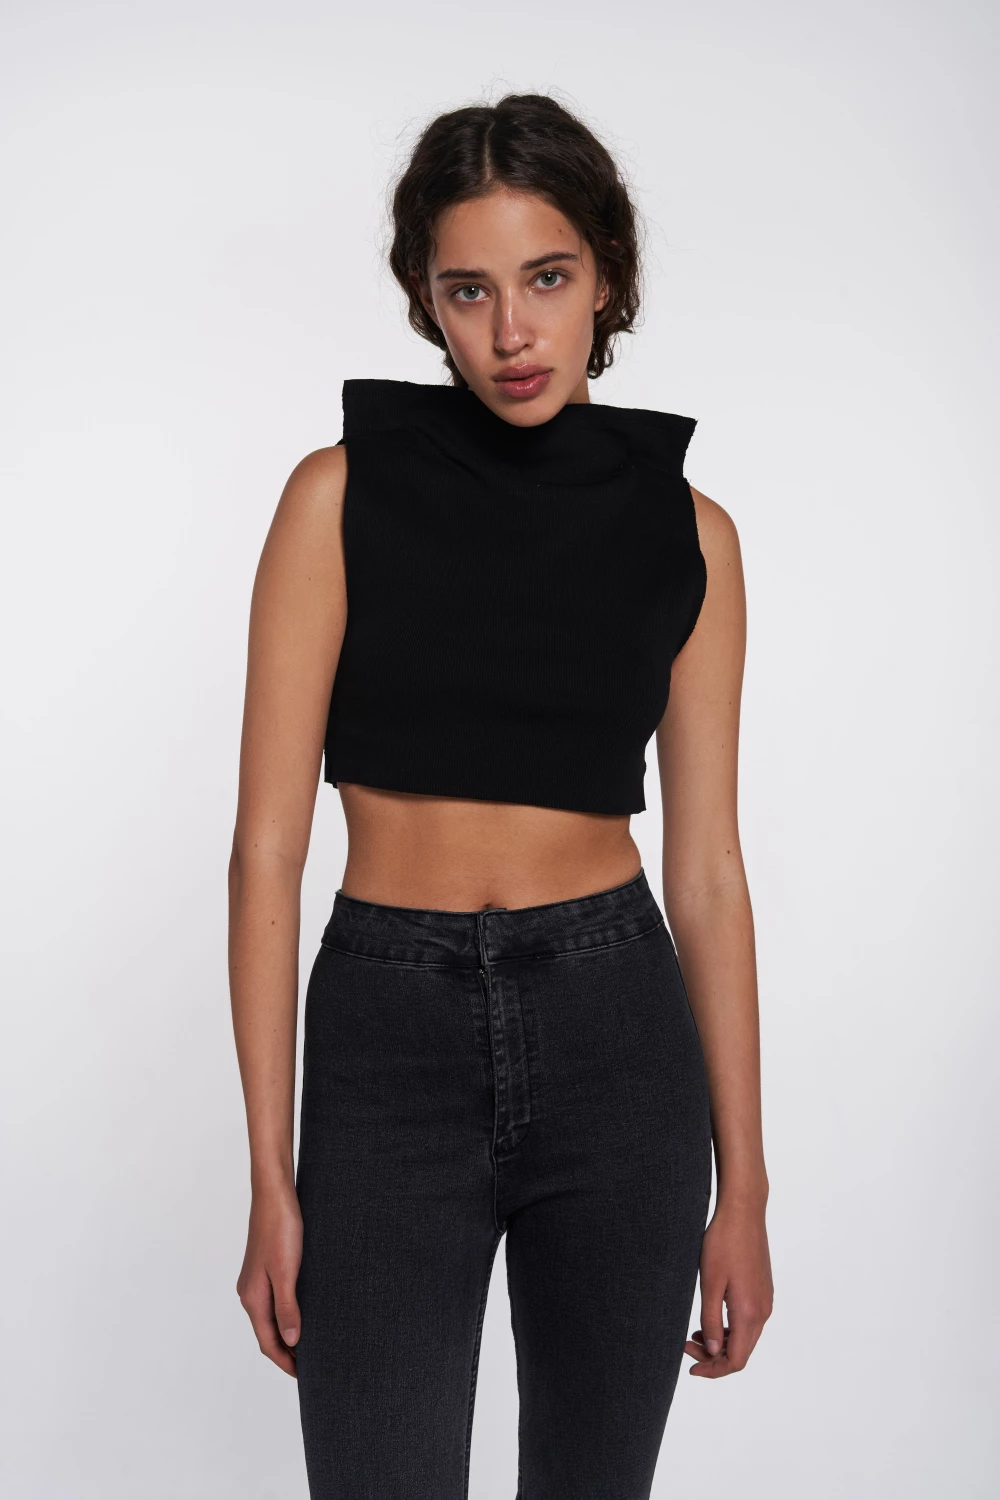 rough ribbed top in black color